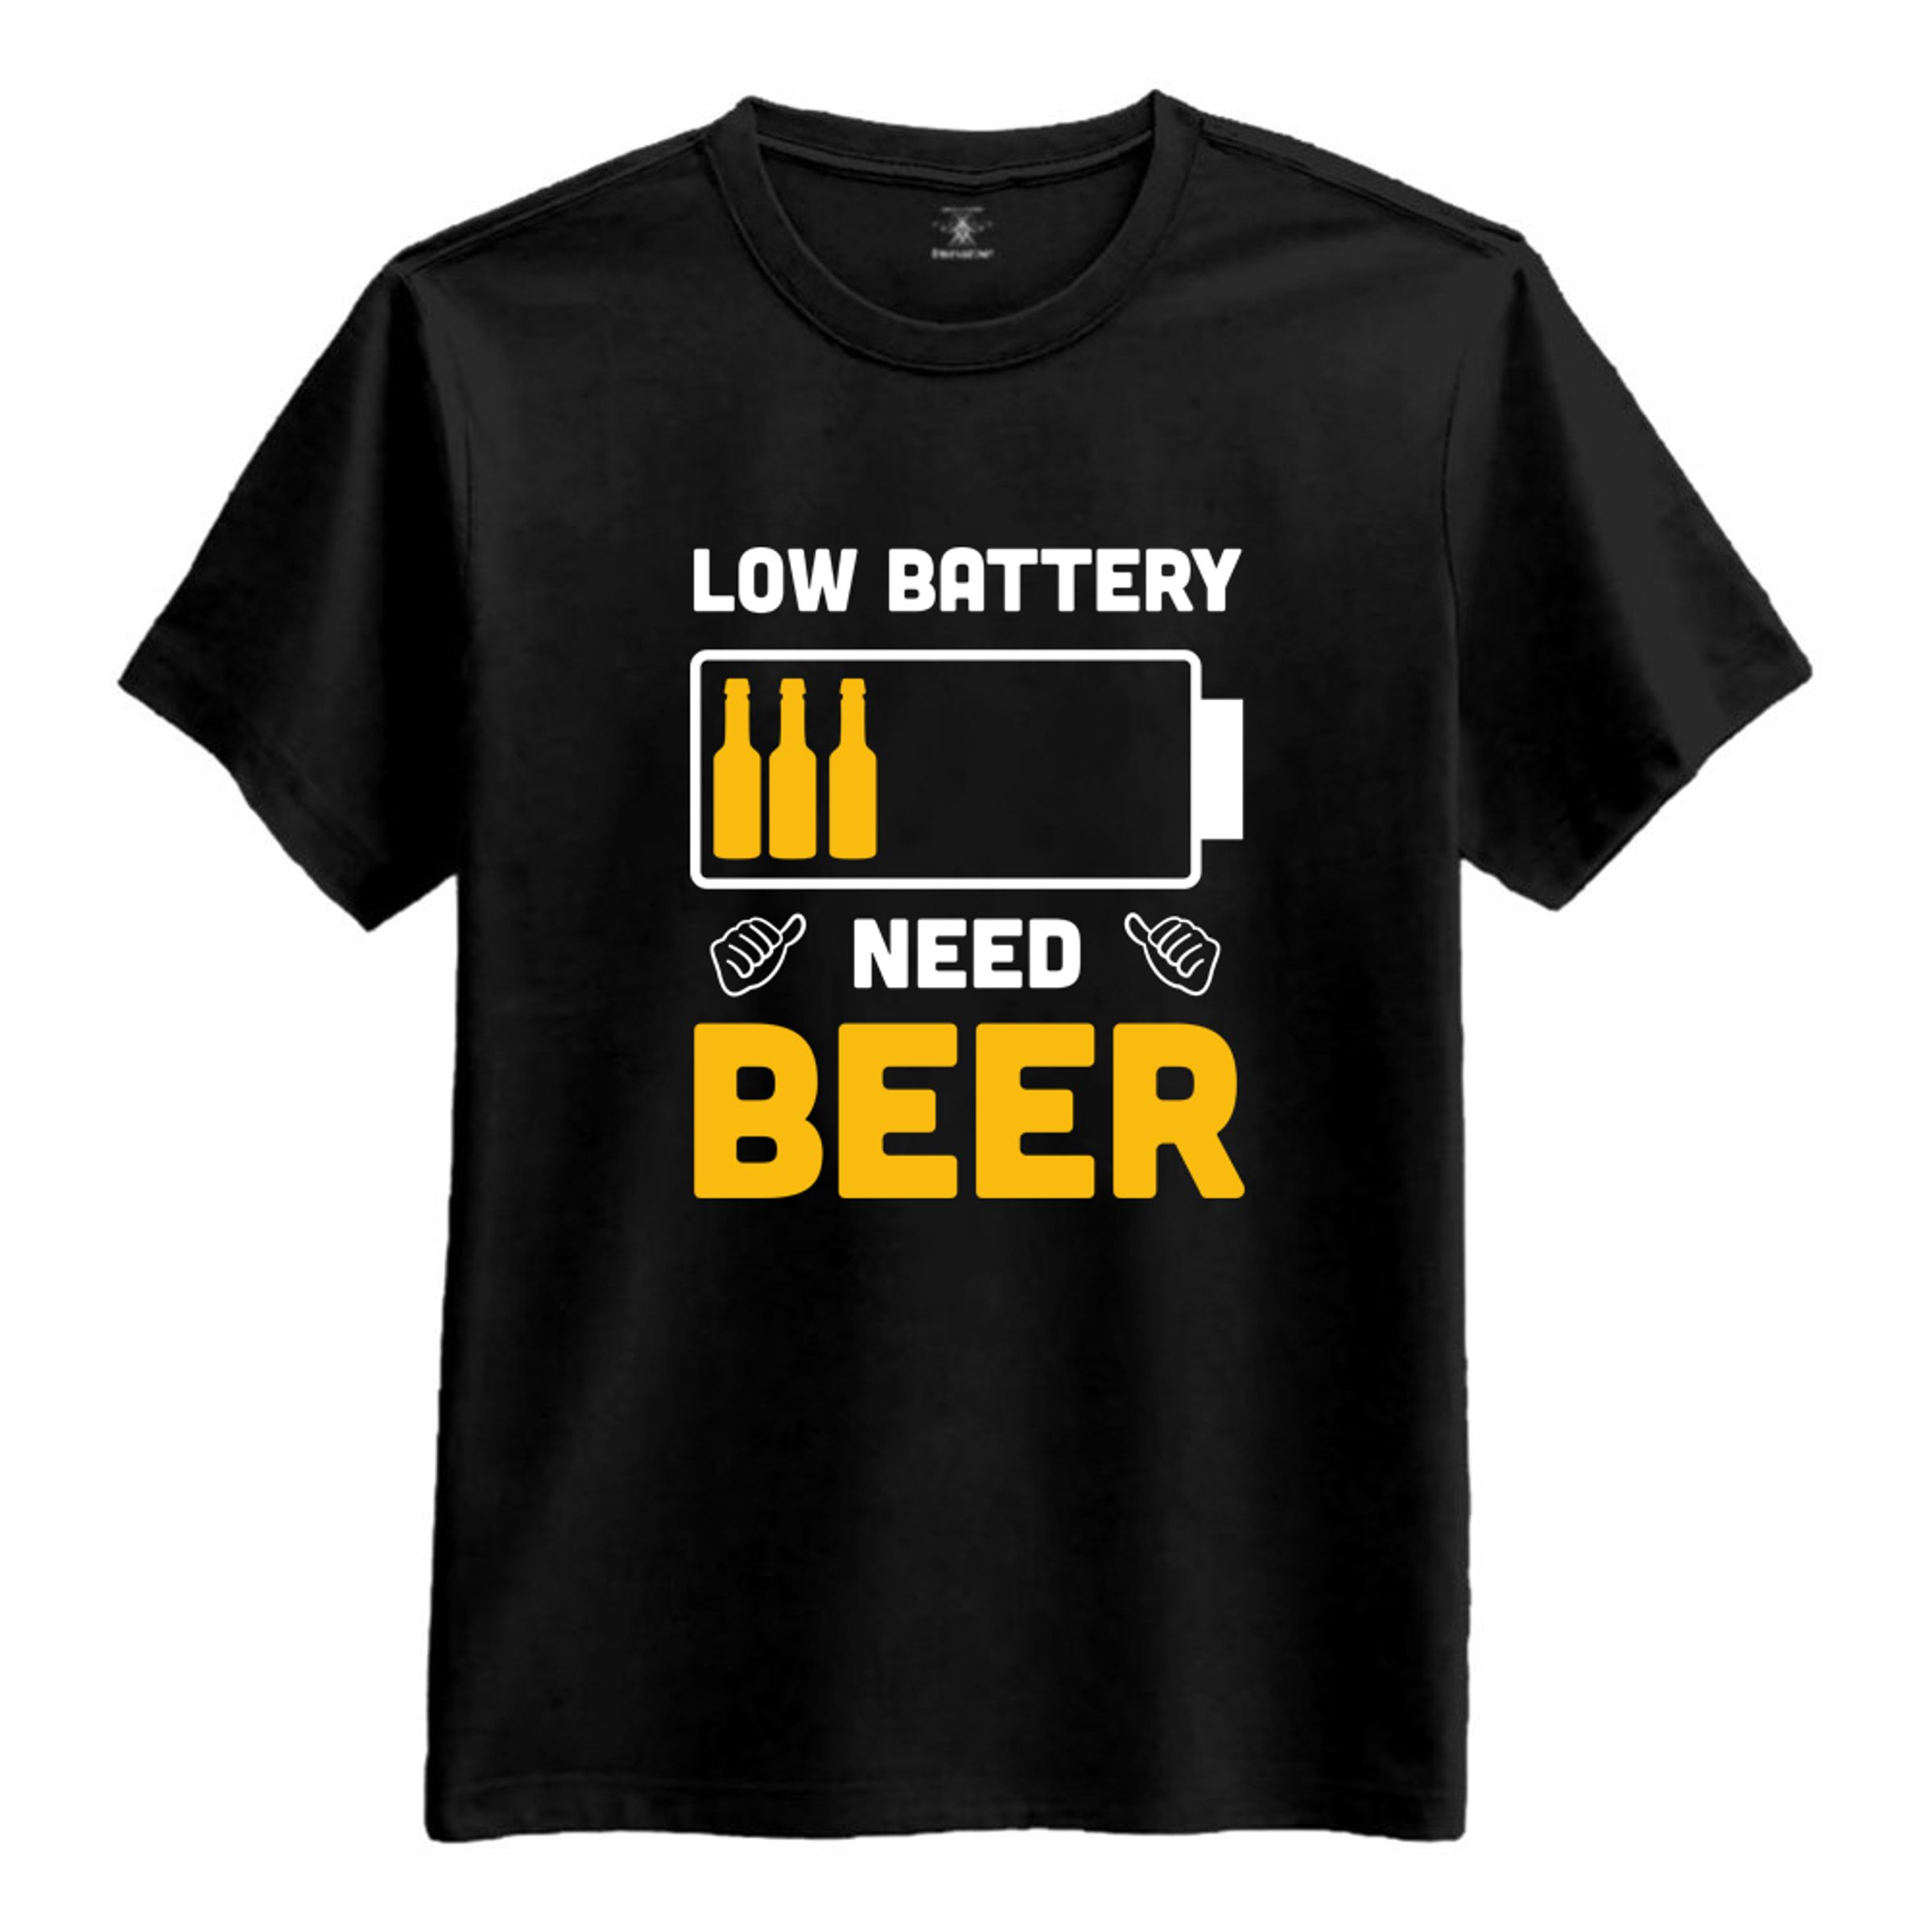 Low Battery Need Beer T-shirt - Large